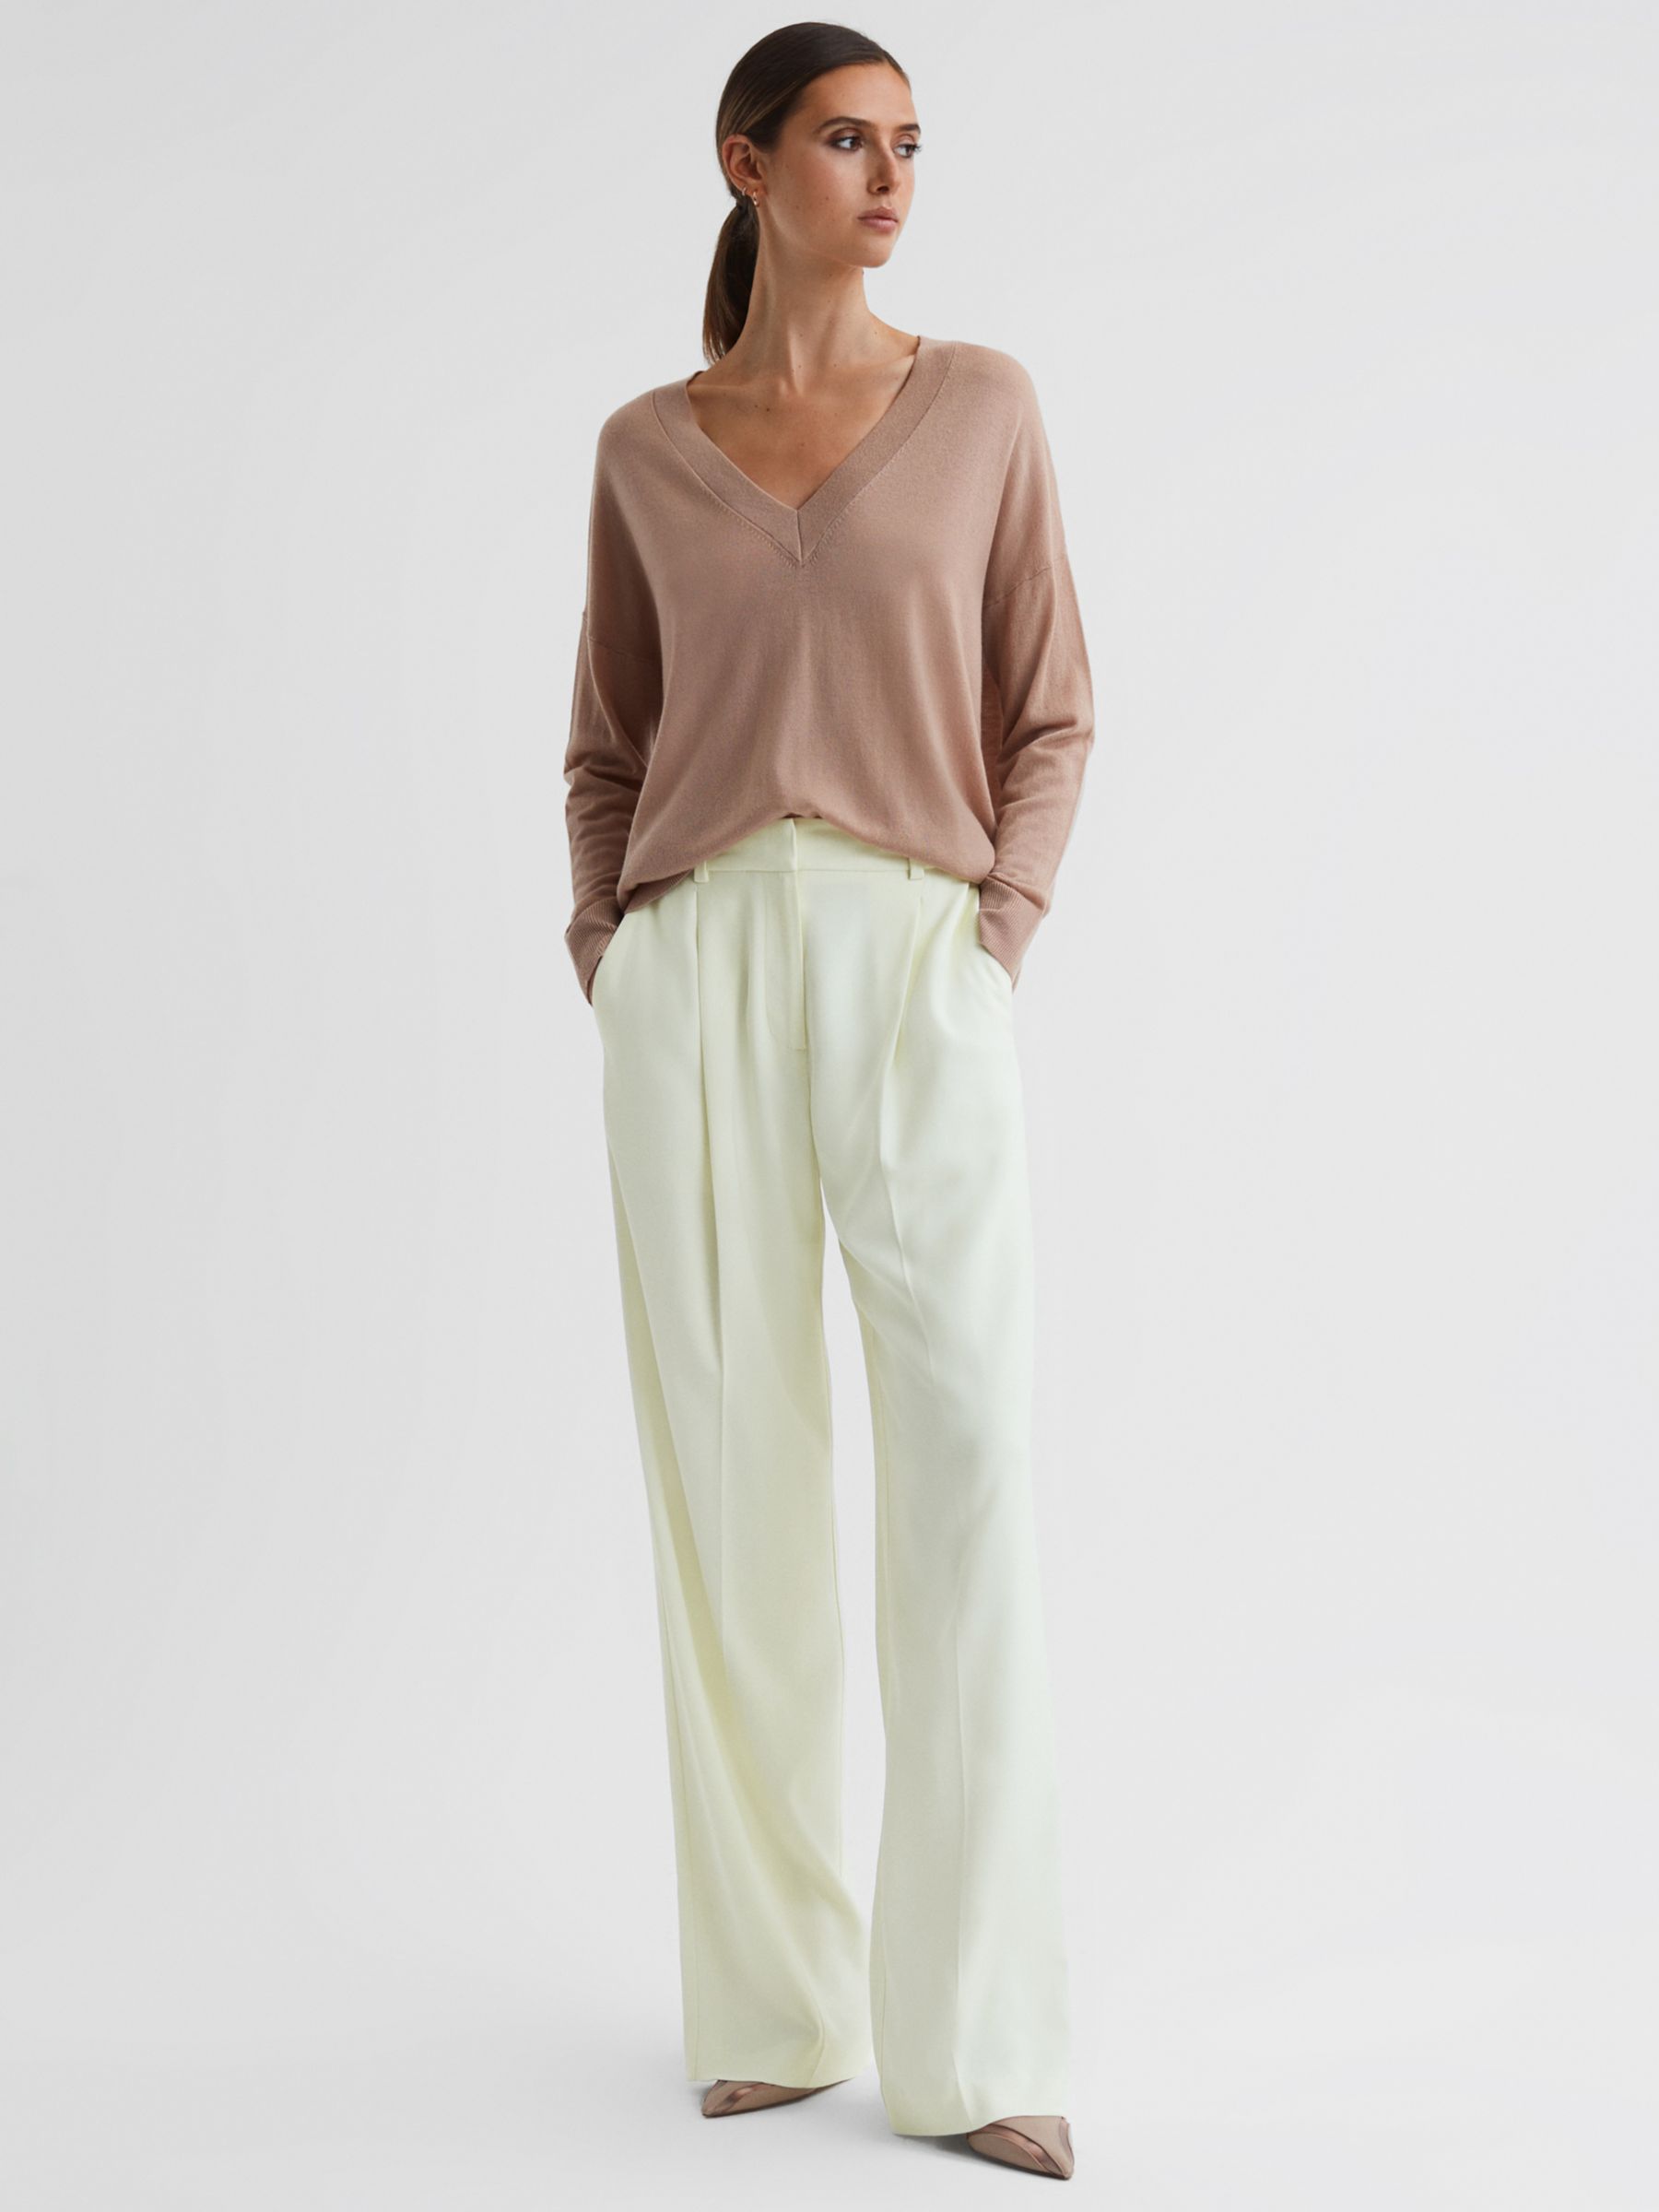 Reiss Liana Pleat Tailored Trousers, Pale Yellow at John Lewis & Partners